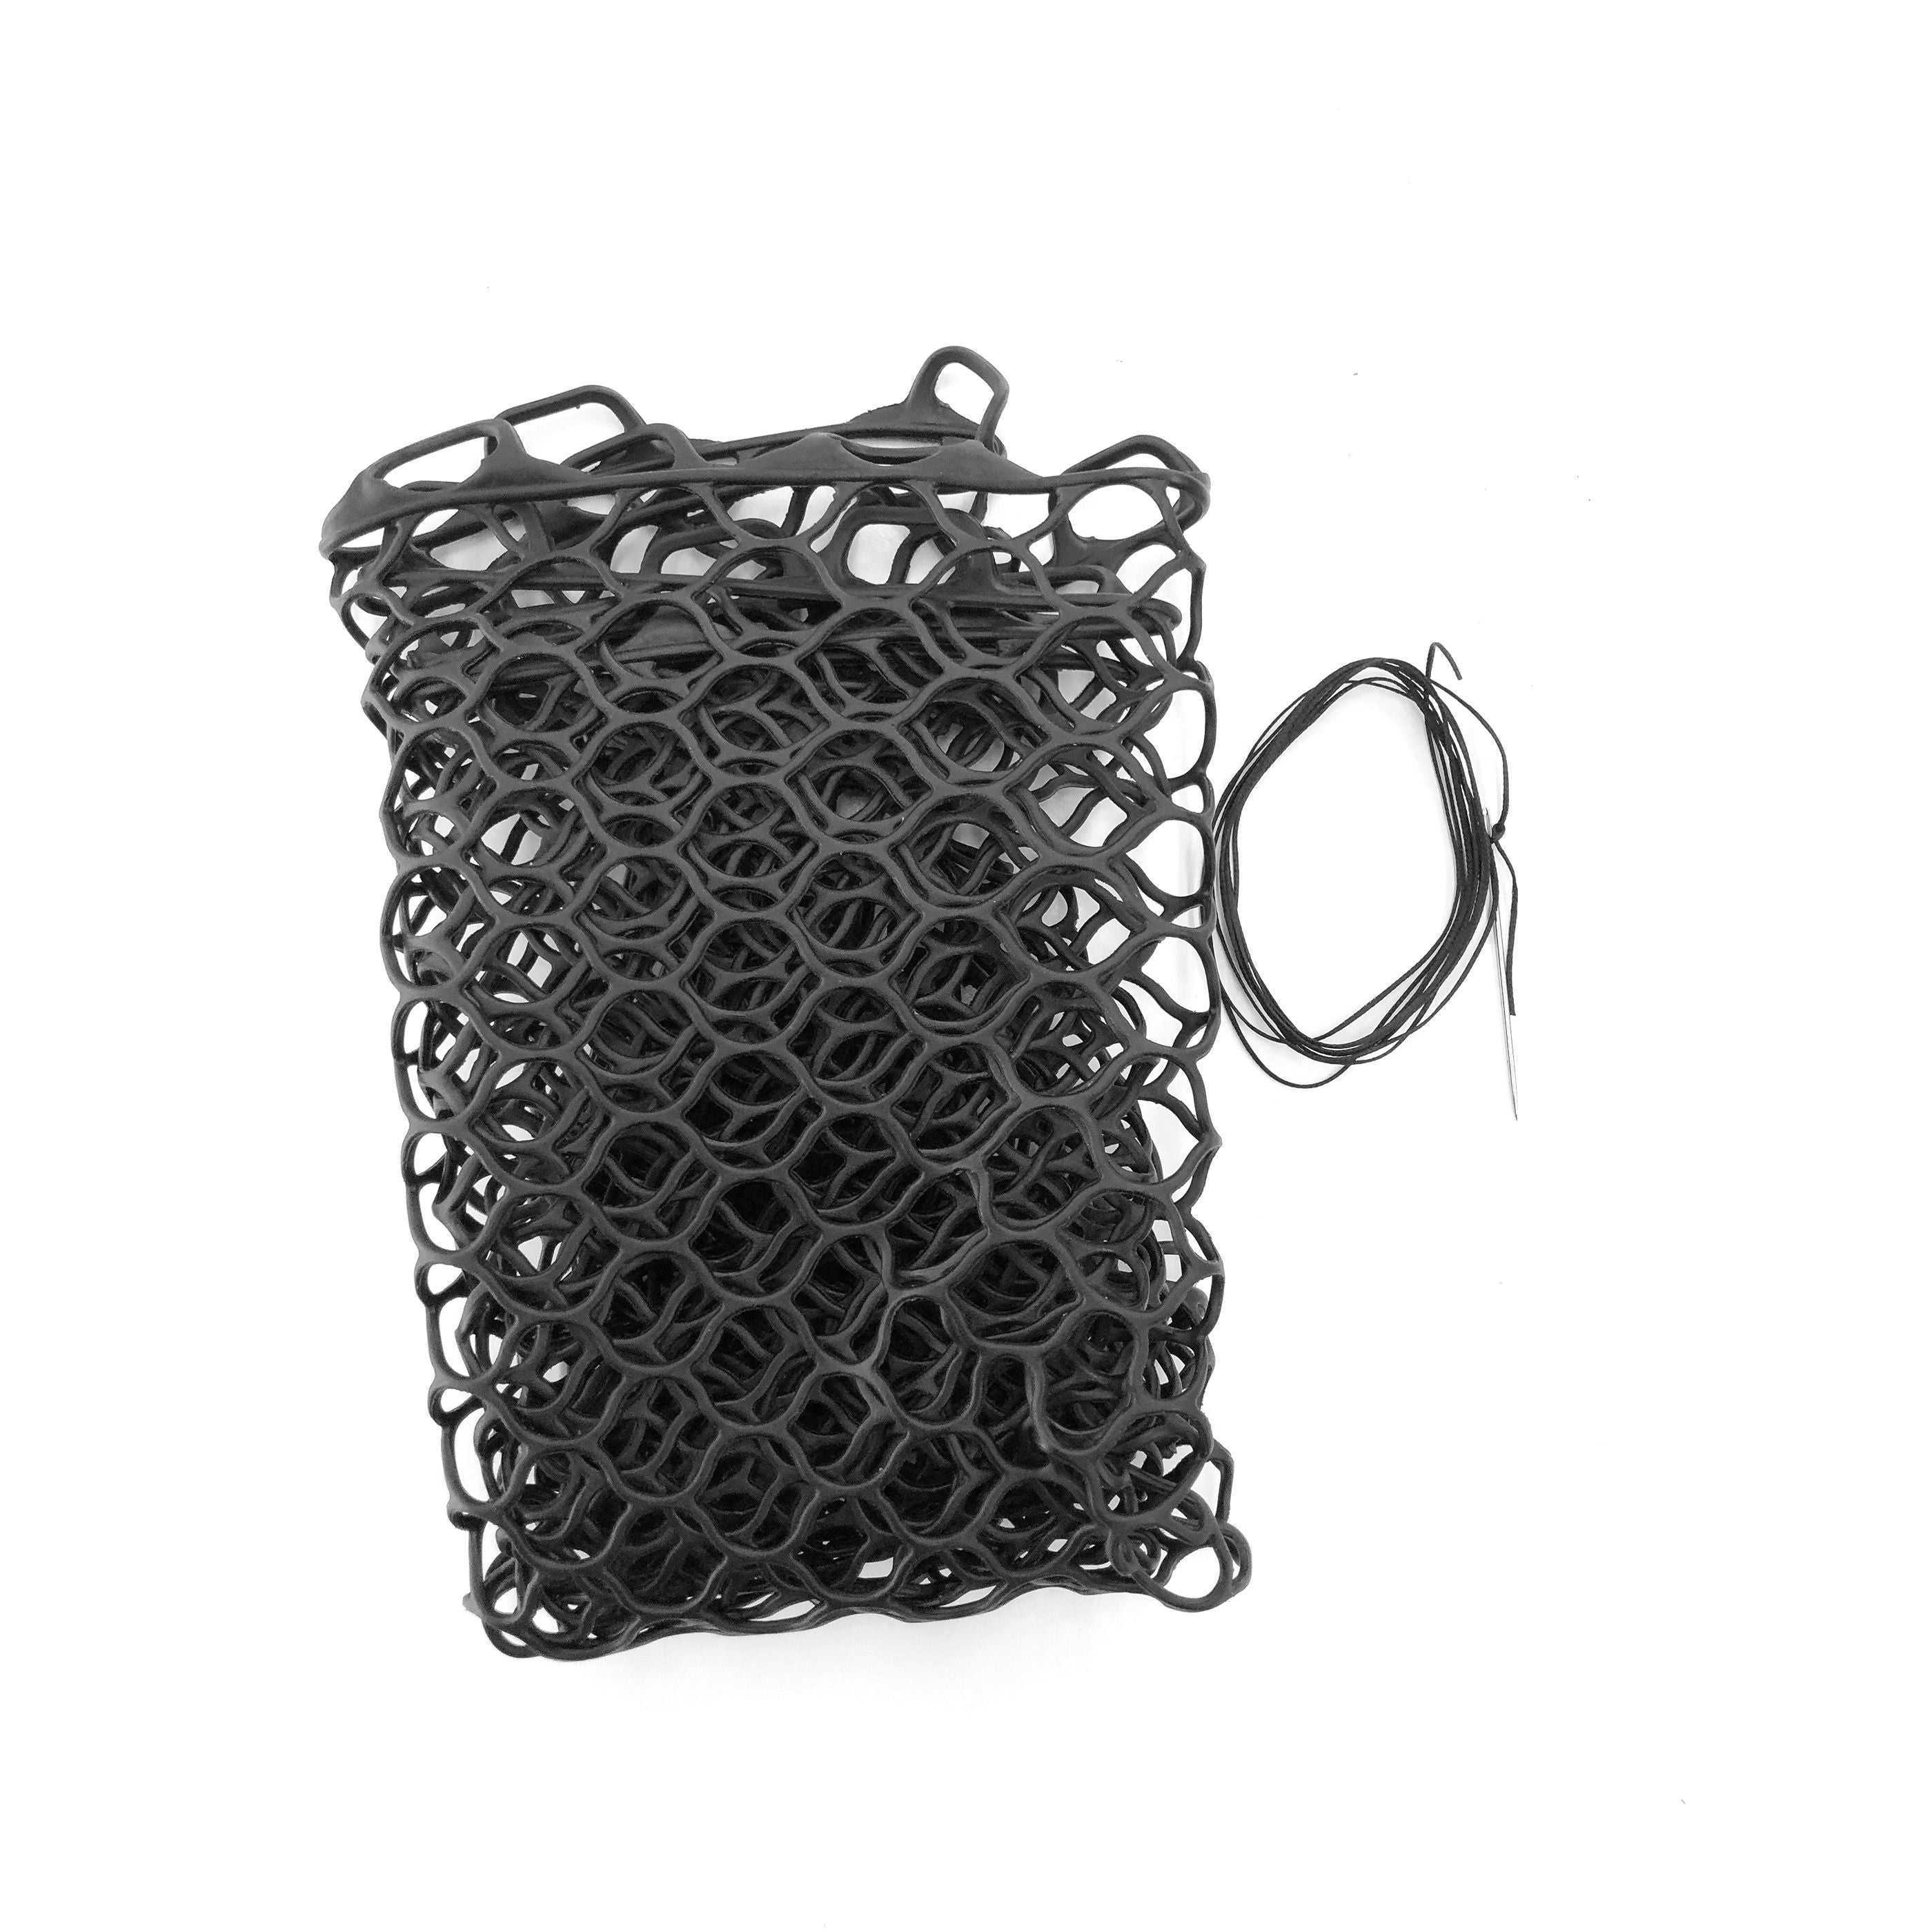 15 Nomad Replacement Rubber Net - Fly Fishing – Fishpond